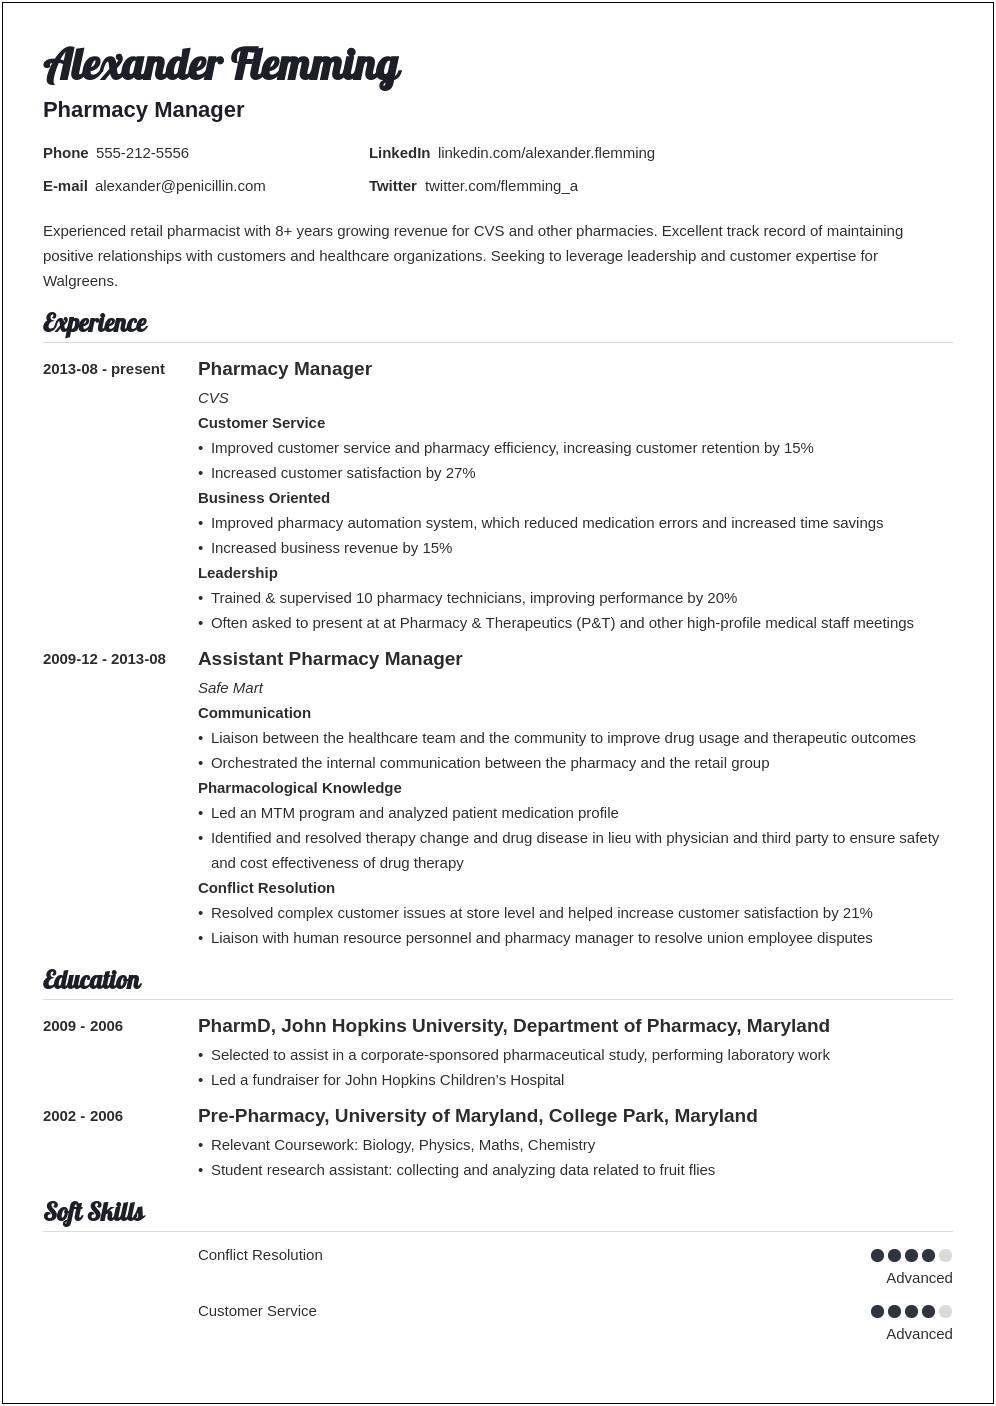 Resume Objective For College Of Pharmacy Application